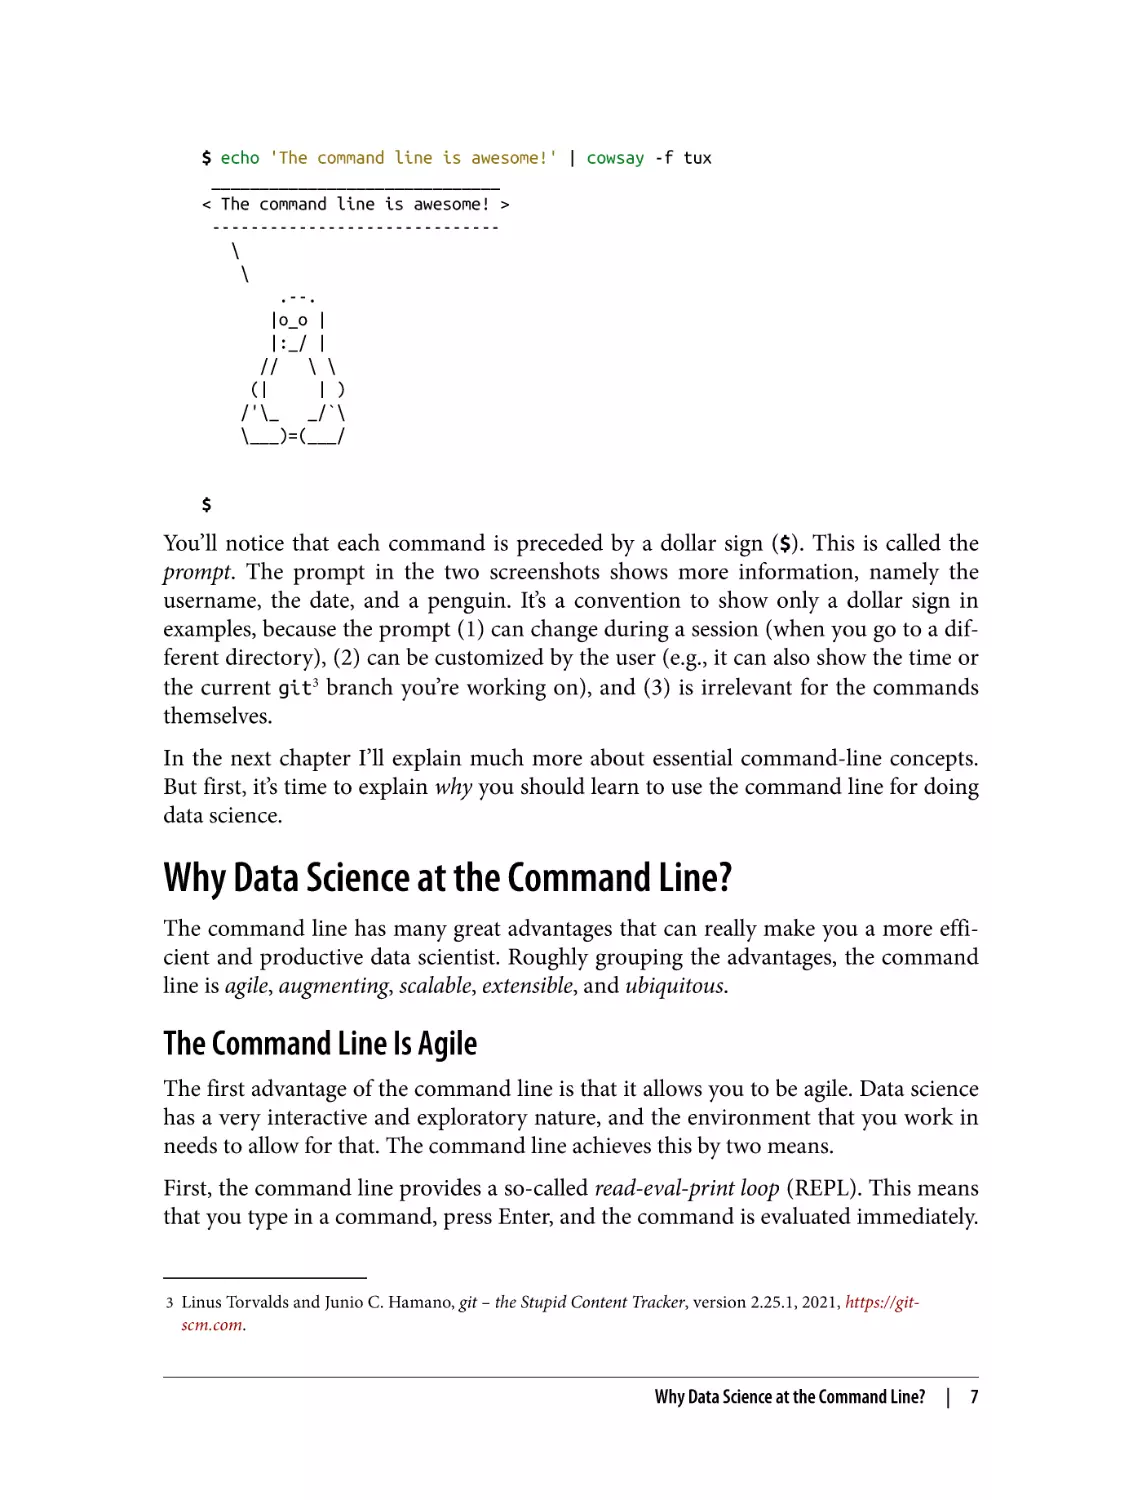 Why Data Science at the Command Line?
The Command Line Is Agile